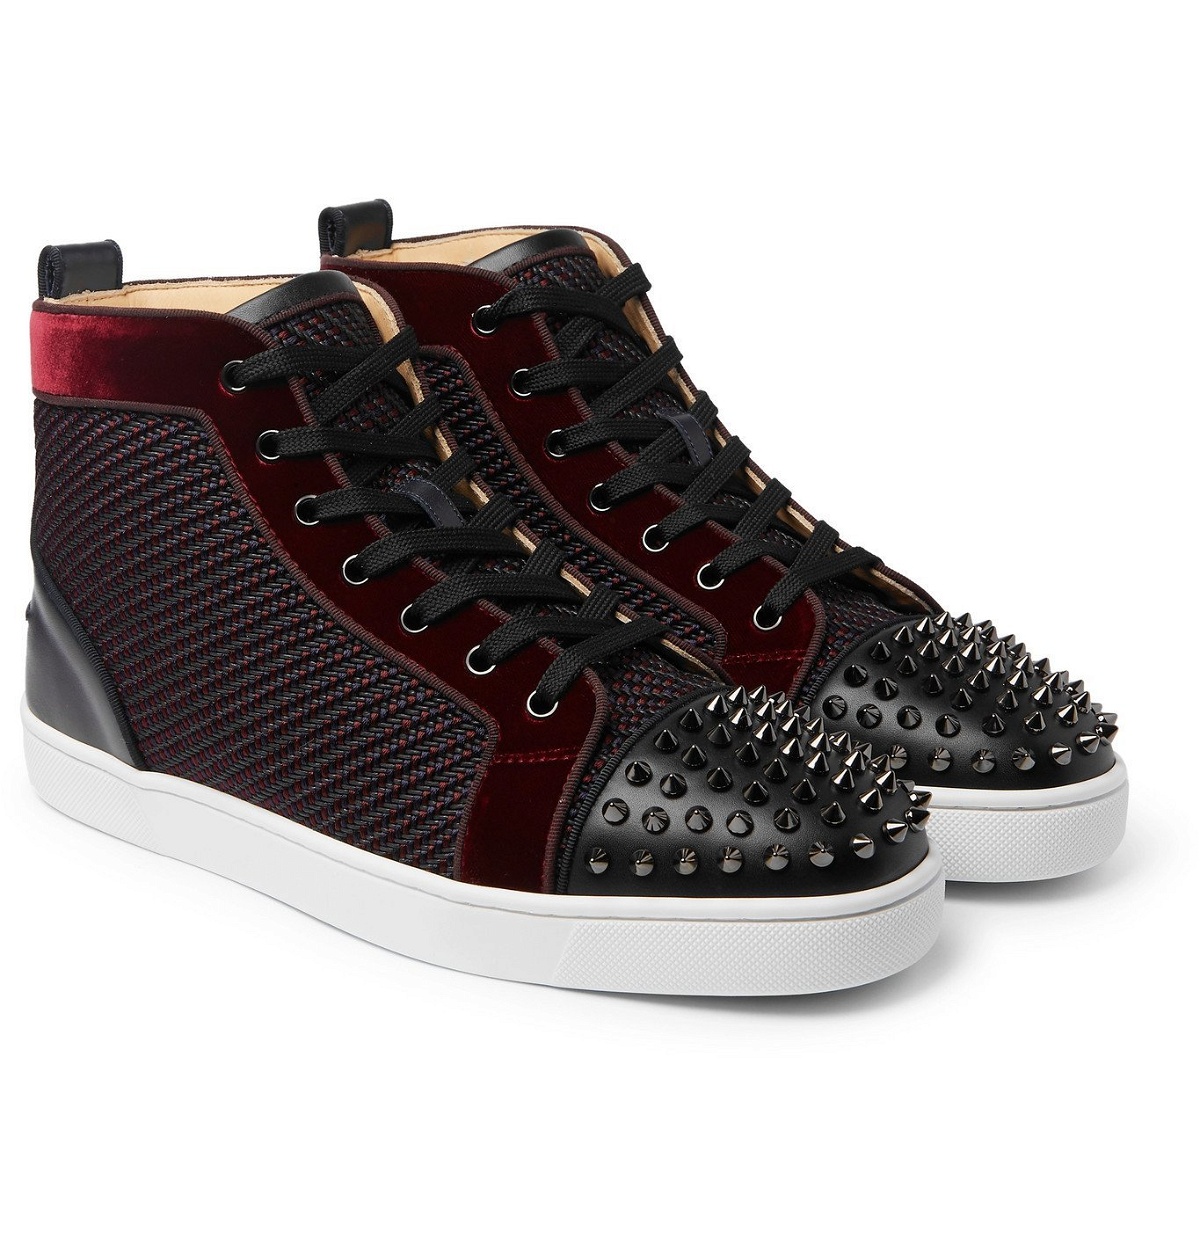 Christian Louboutin Tricolor Patent and Leather Louis Spikes High Top  Sneakers Size 44 Christian Louboutin